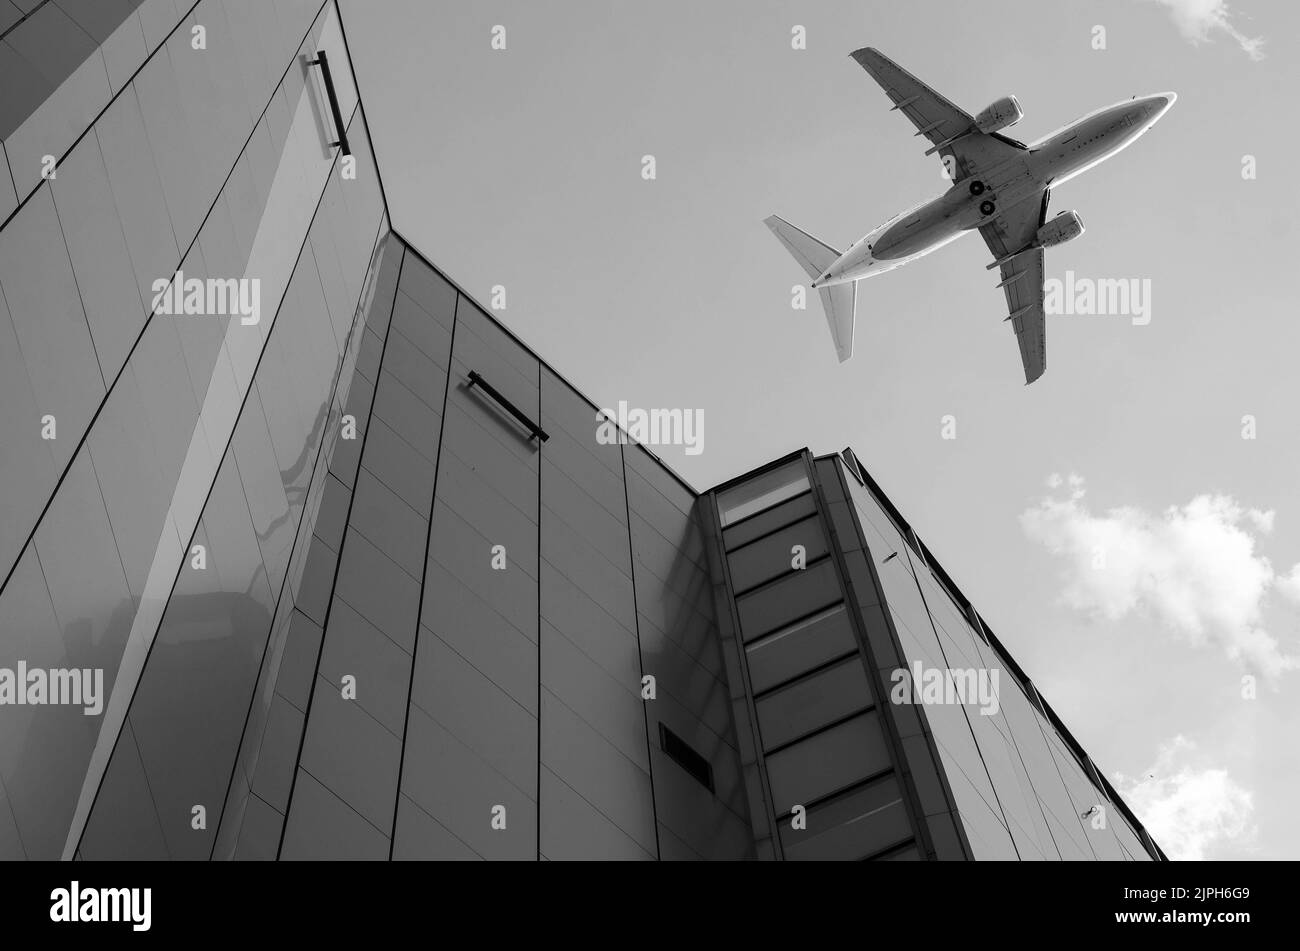 Airplane in the sky with modern buildings Stock Photo